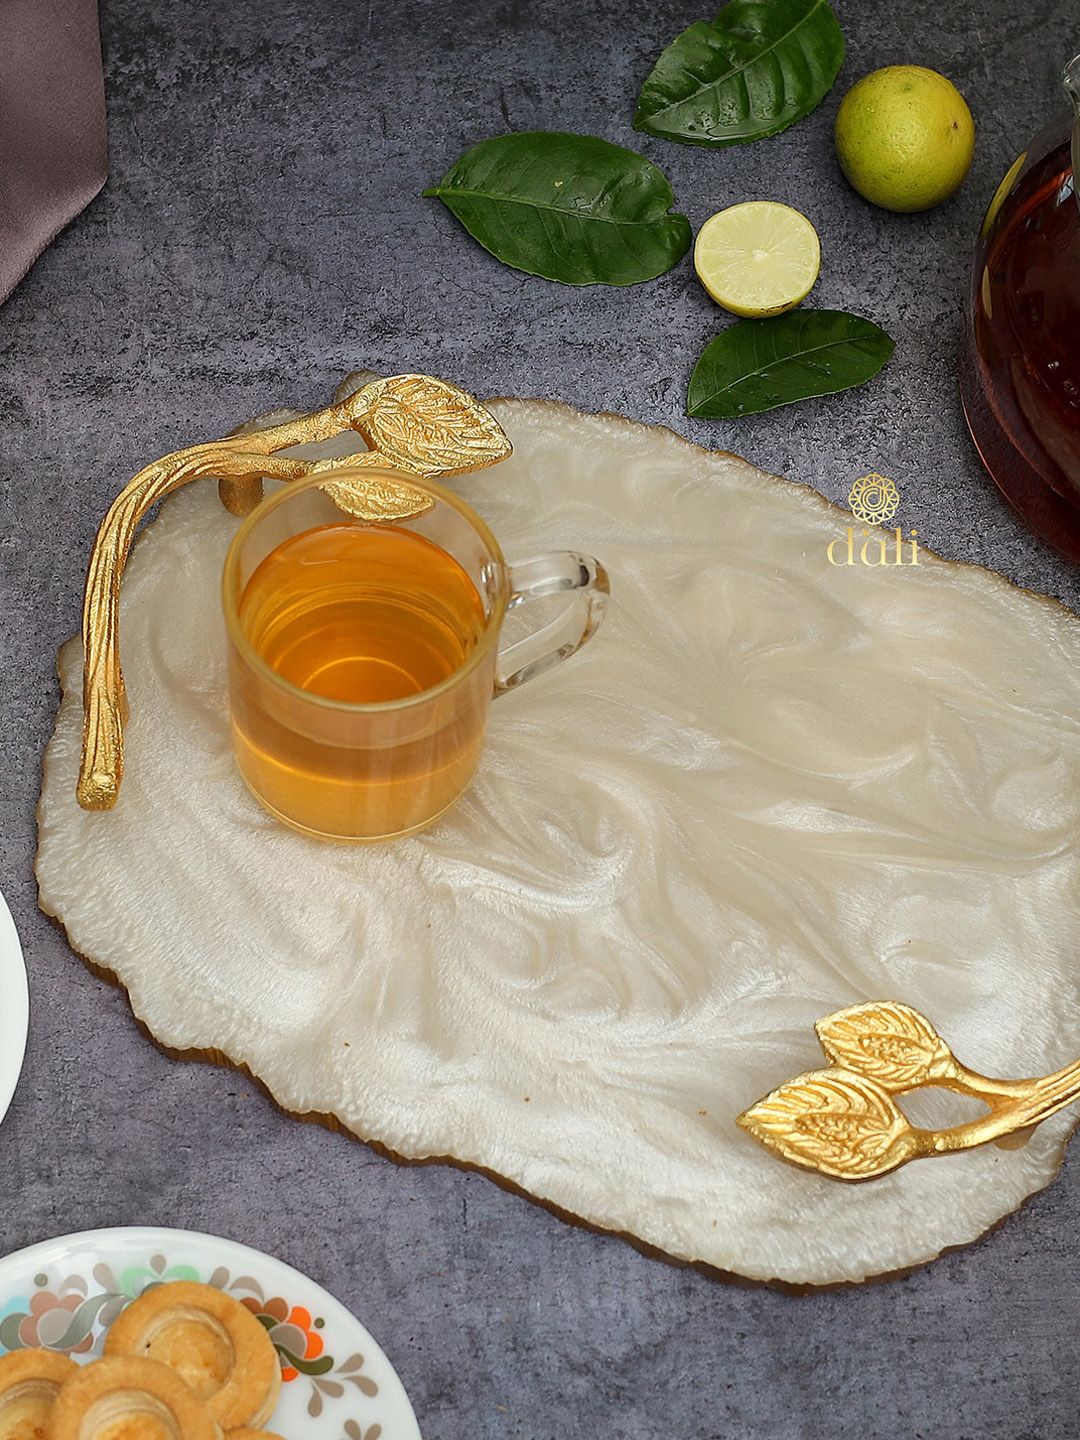 DULI Cream & Gold-Colored Resin Serving Tray Price in India